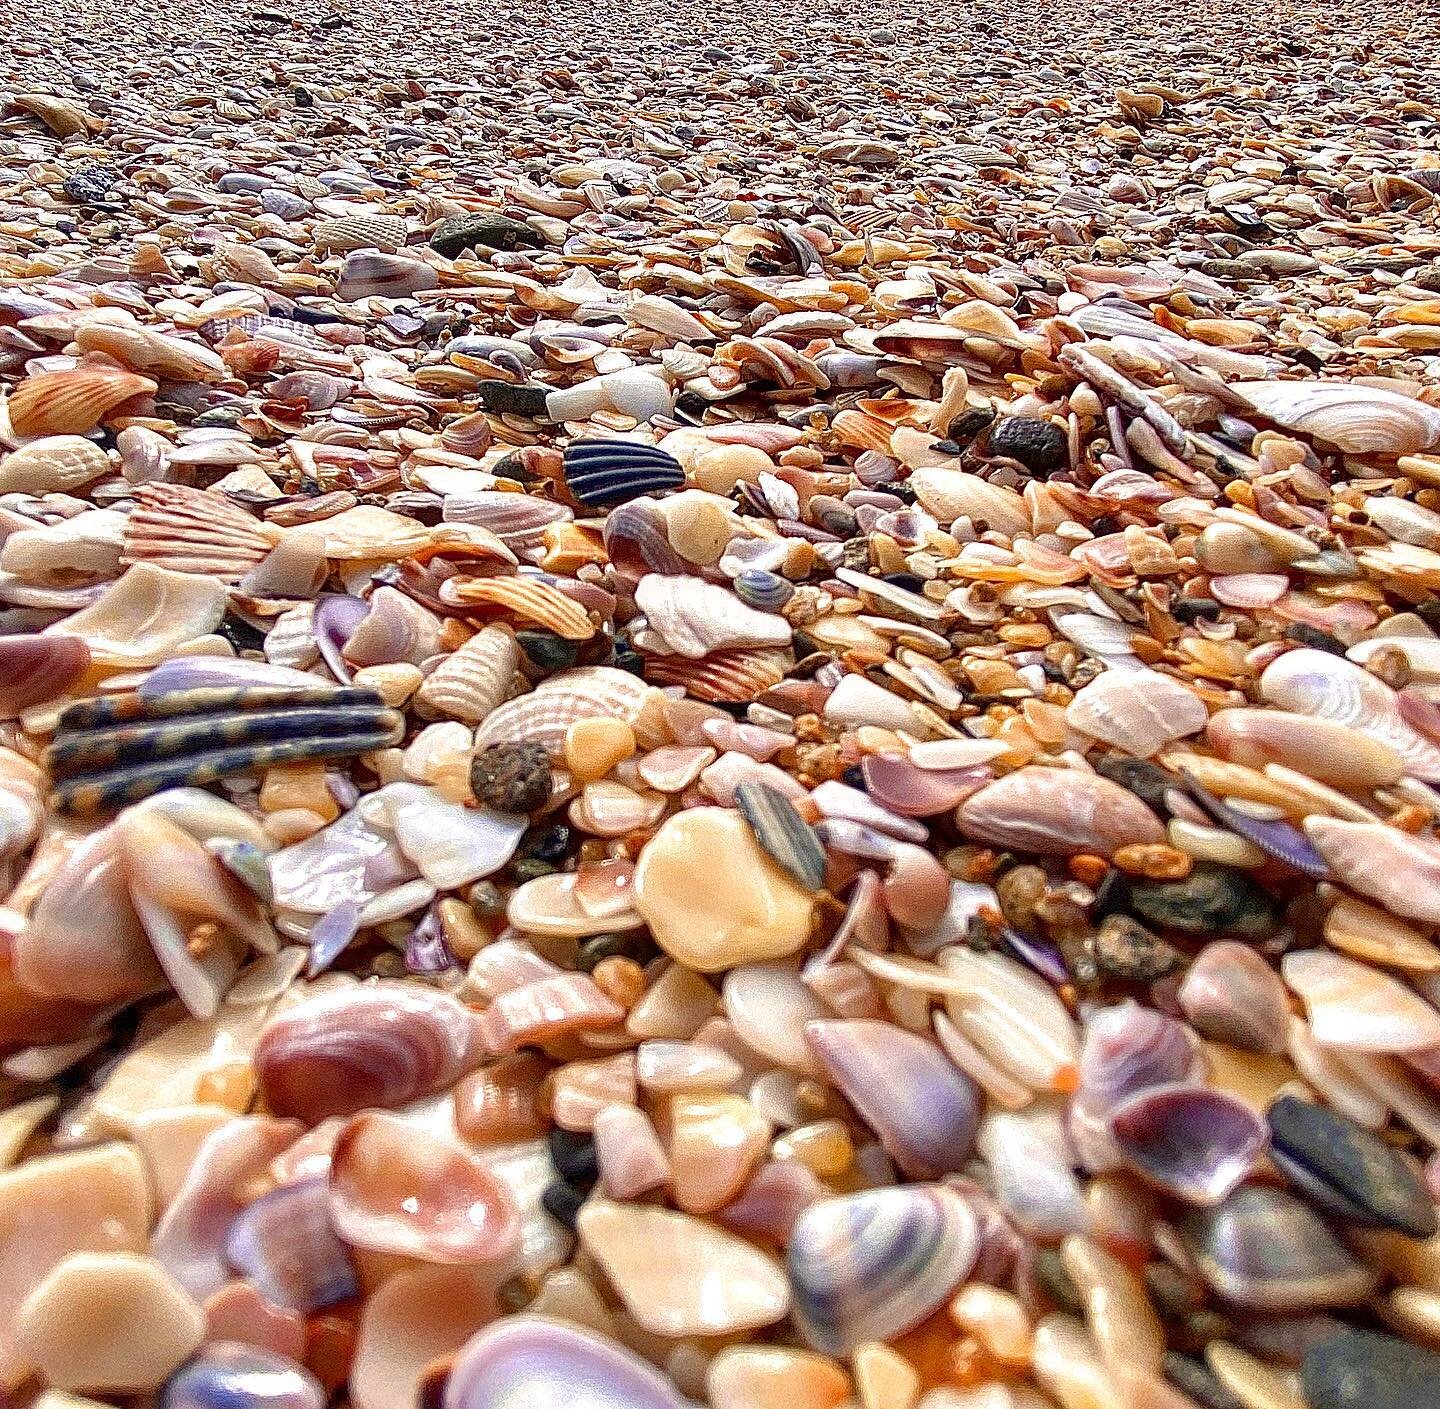 What if humans had shells to leave behind? #marinelife #texture #aftermath